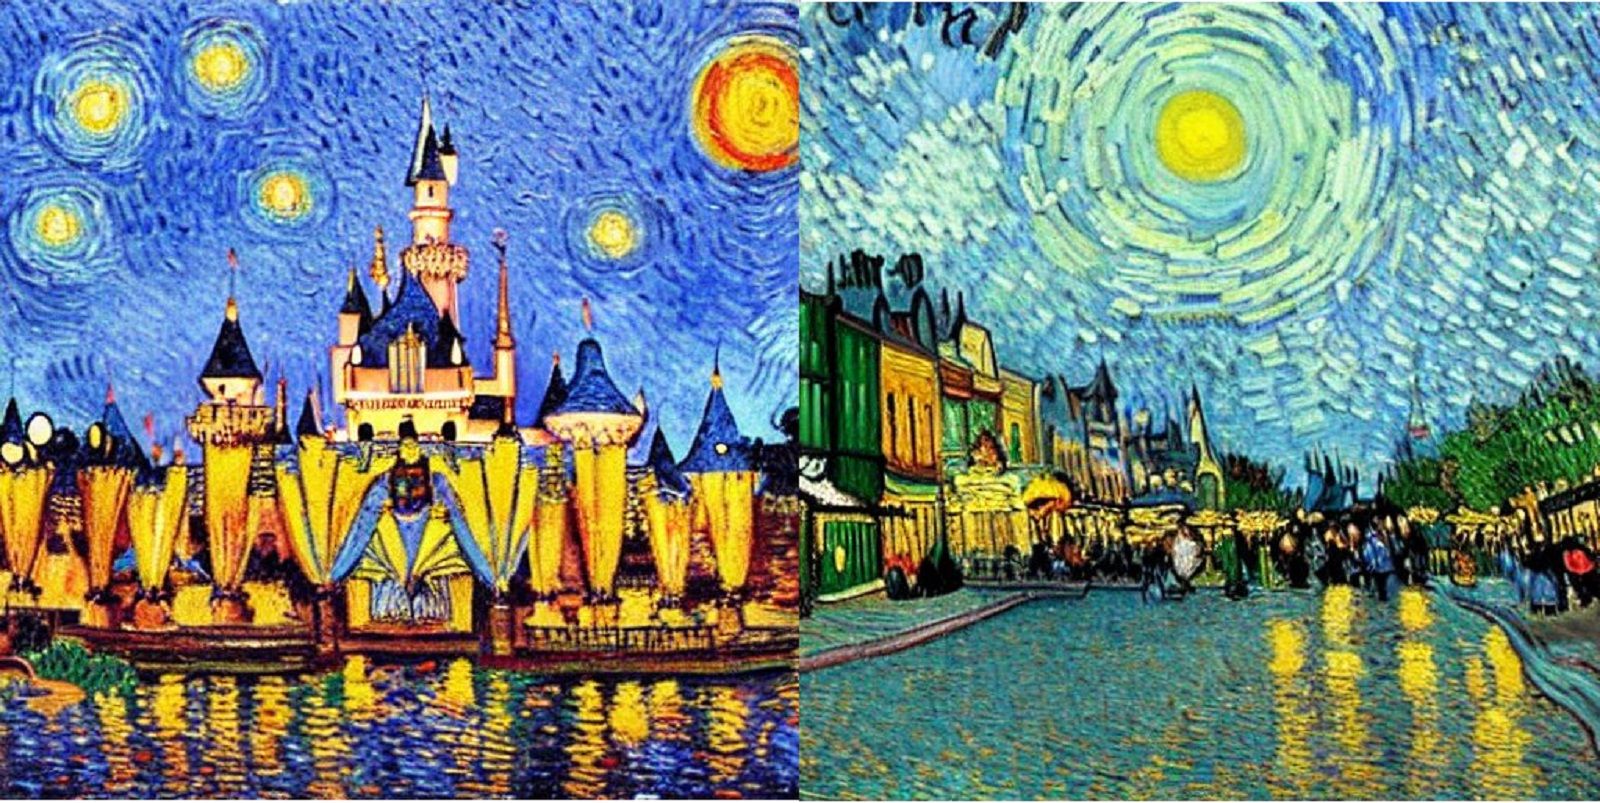 These astounding images were made by Stable Diffusion artificial intelligence photo 3